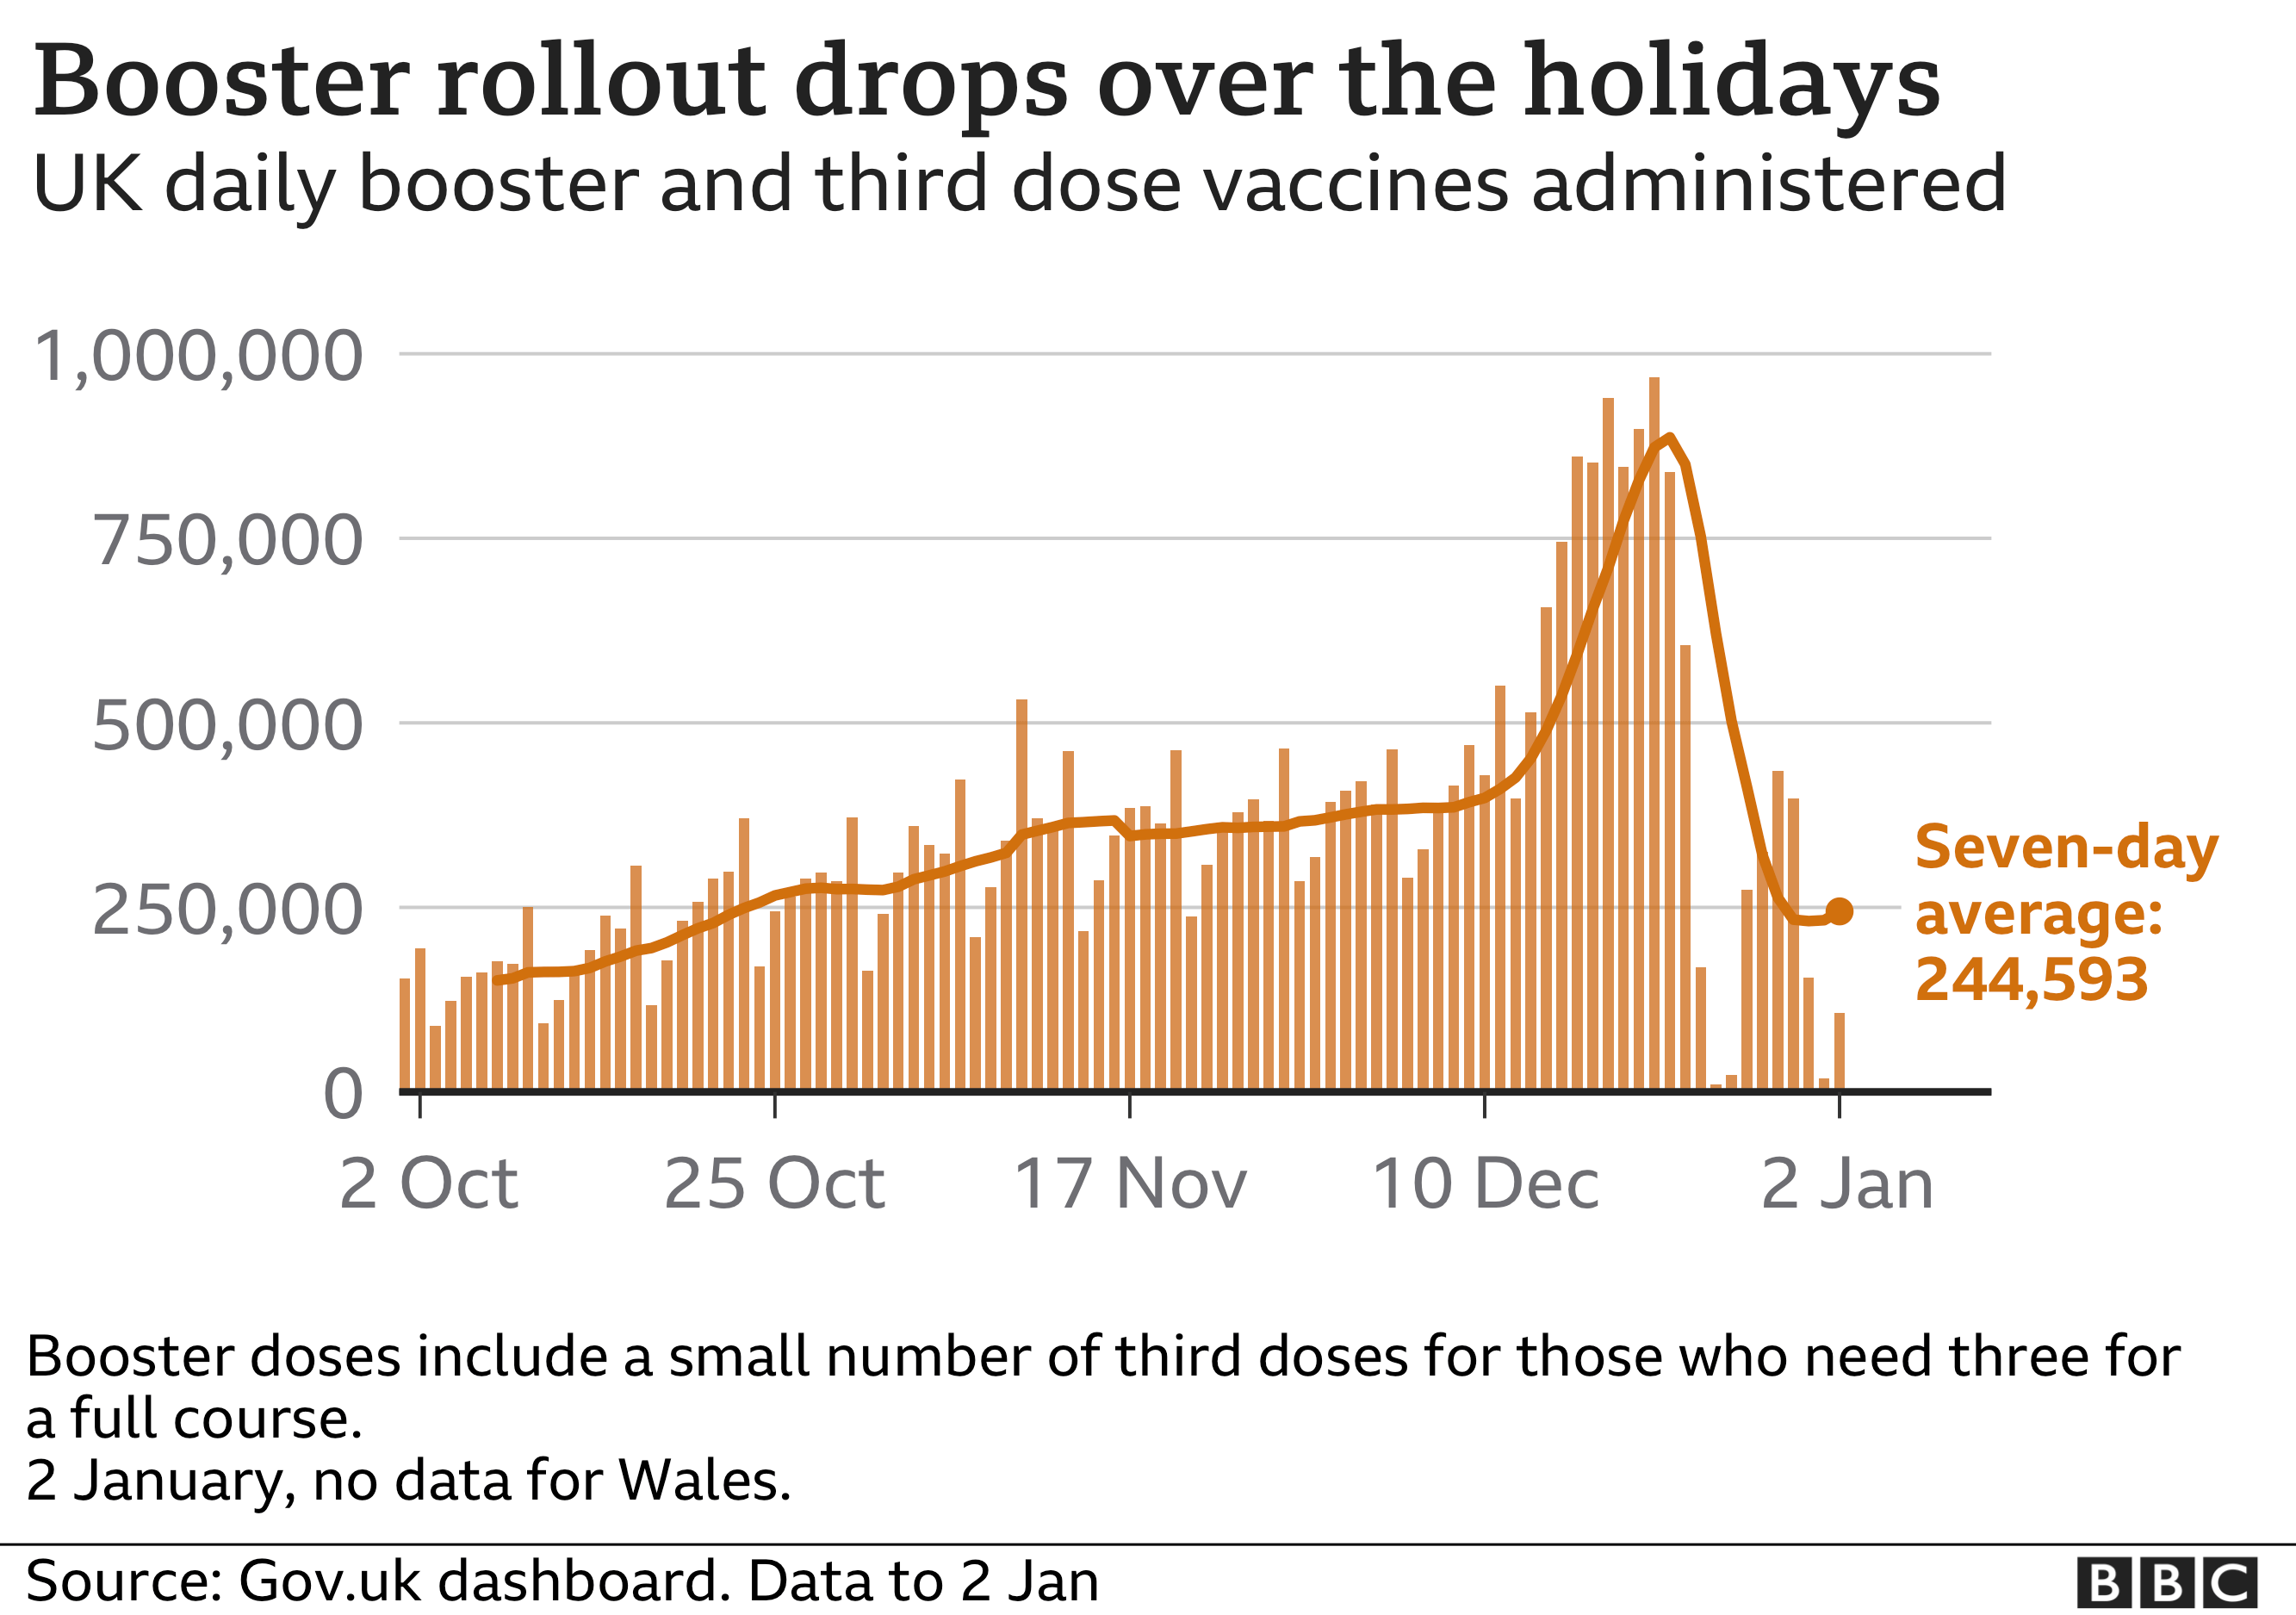 Chart showing the number of people receiving a booster or third dose of a vaccine each day